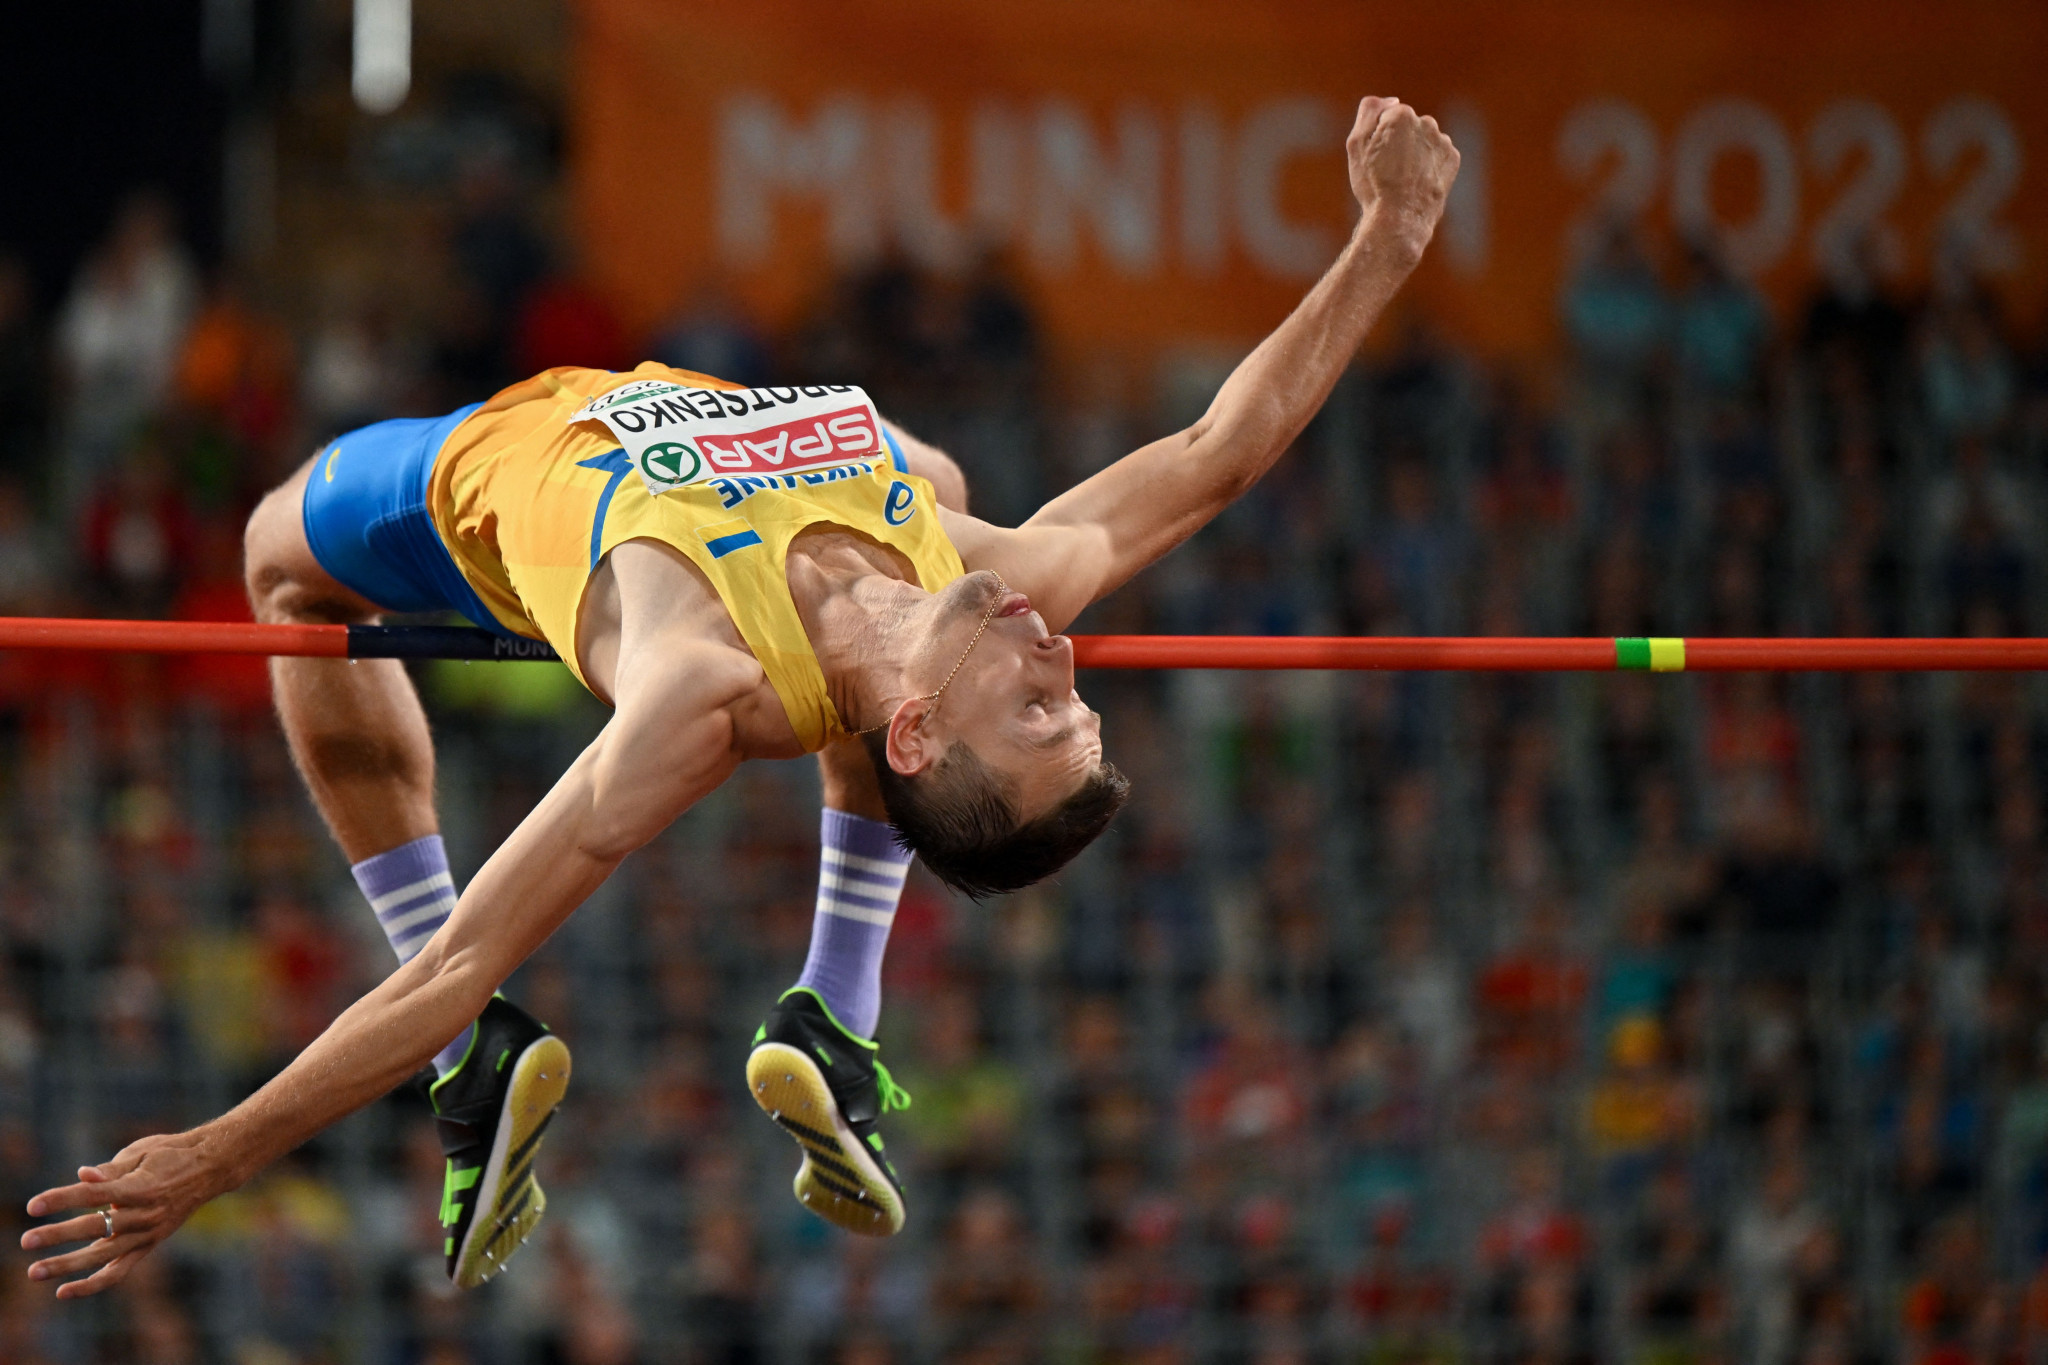 Andriy Protsenko competed at the Summer Universiade twice ©Getty Images